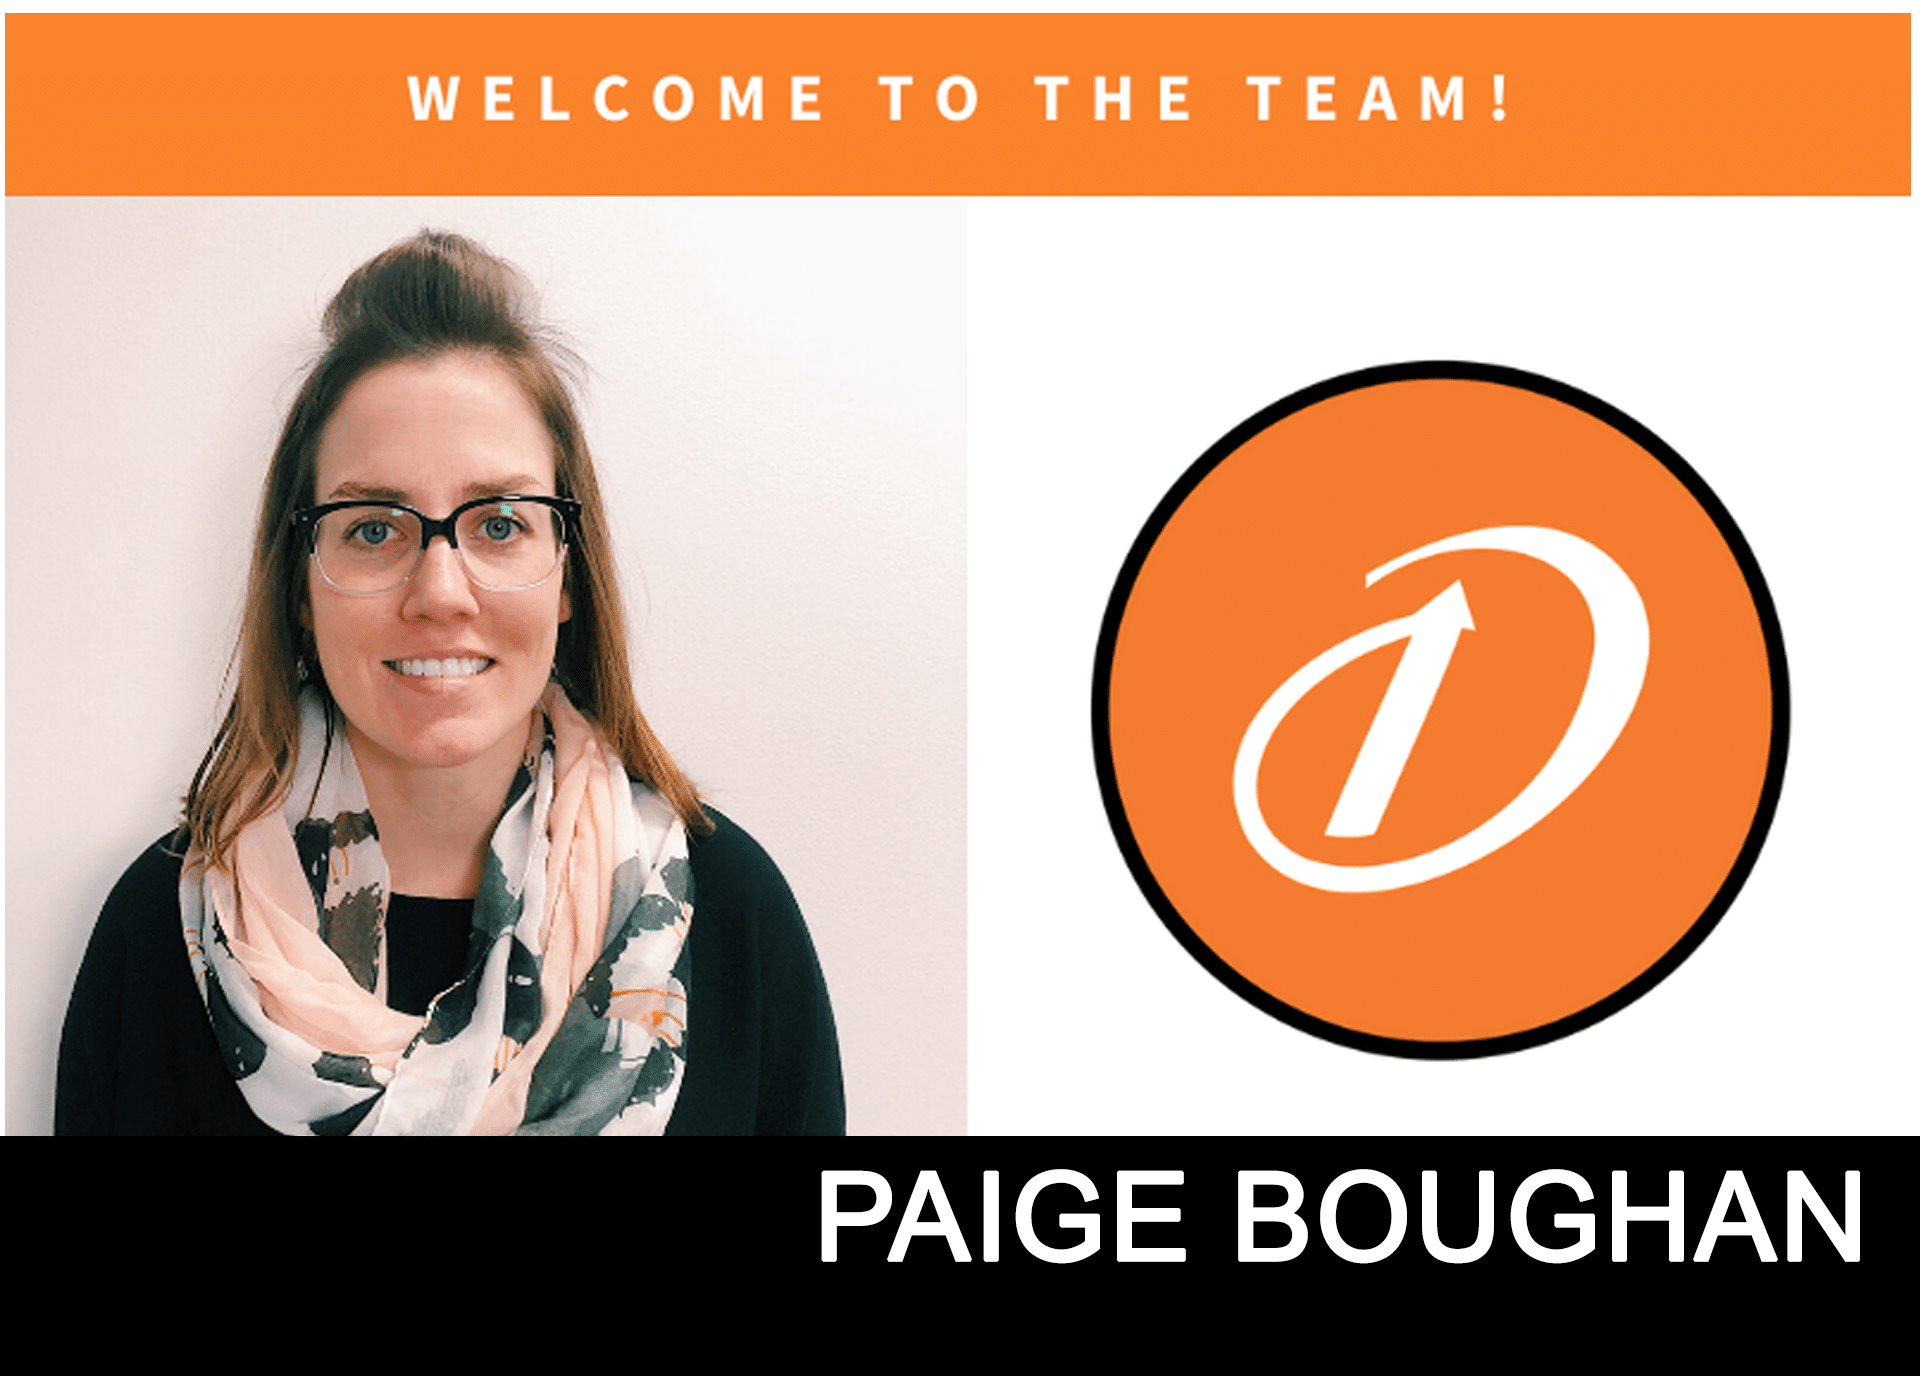 Welcome Paige